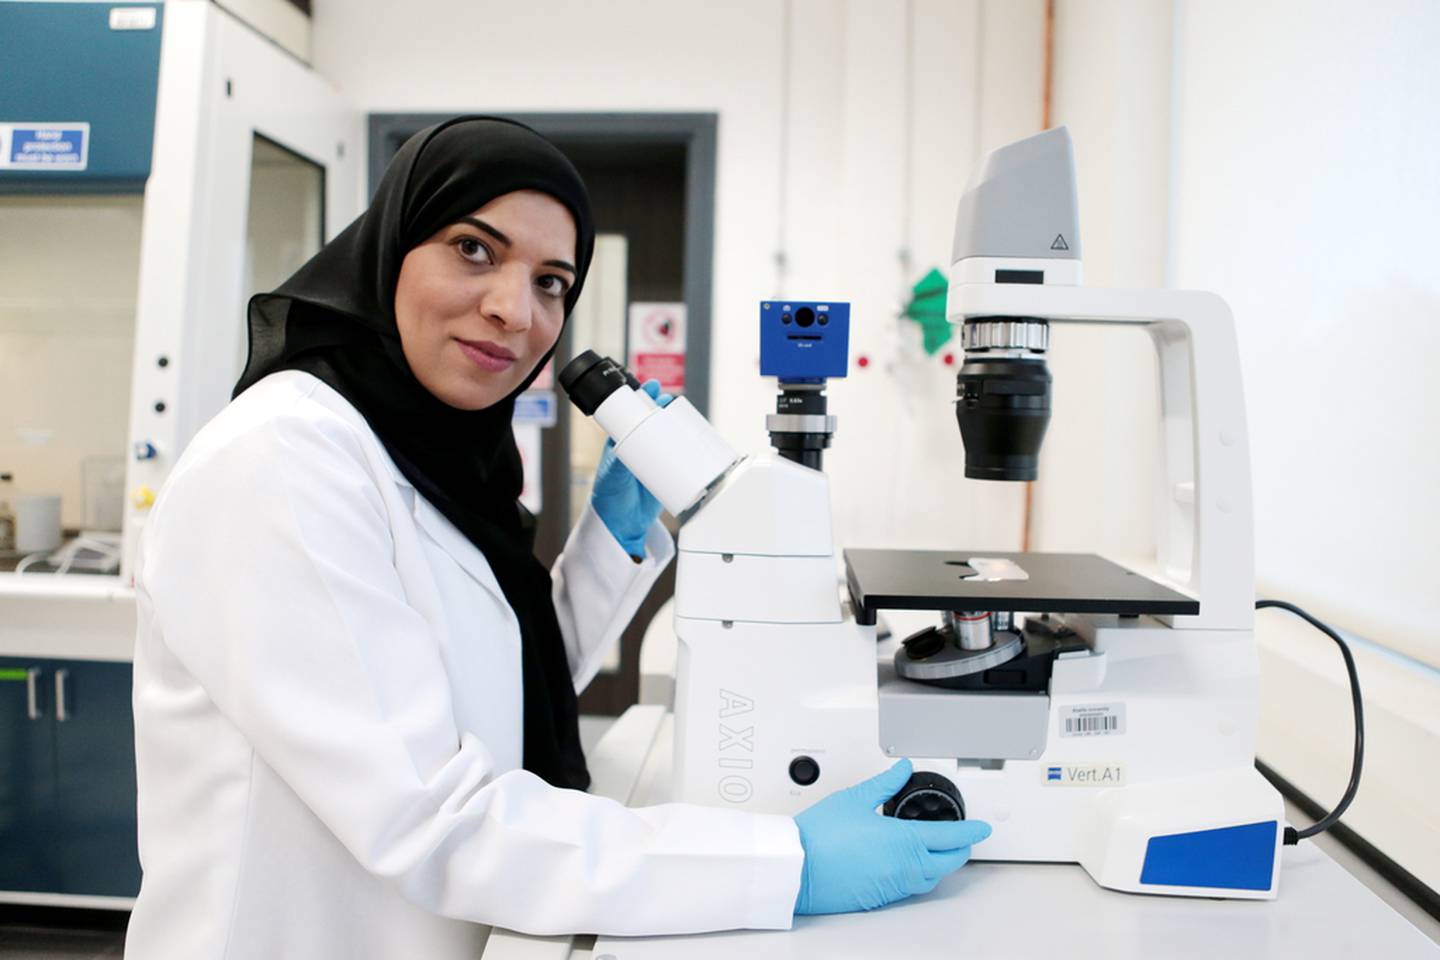 Dr Habiba Al Safar has made crucial breakthroughs in controlling diabetes and championed the role of women in medicine and disease prevention. Christopher Pike / The National